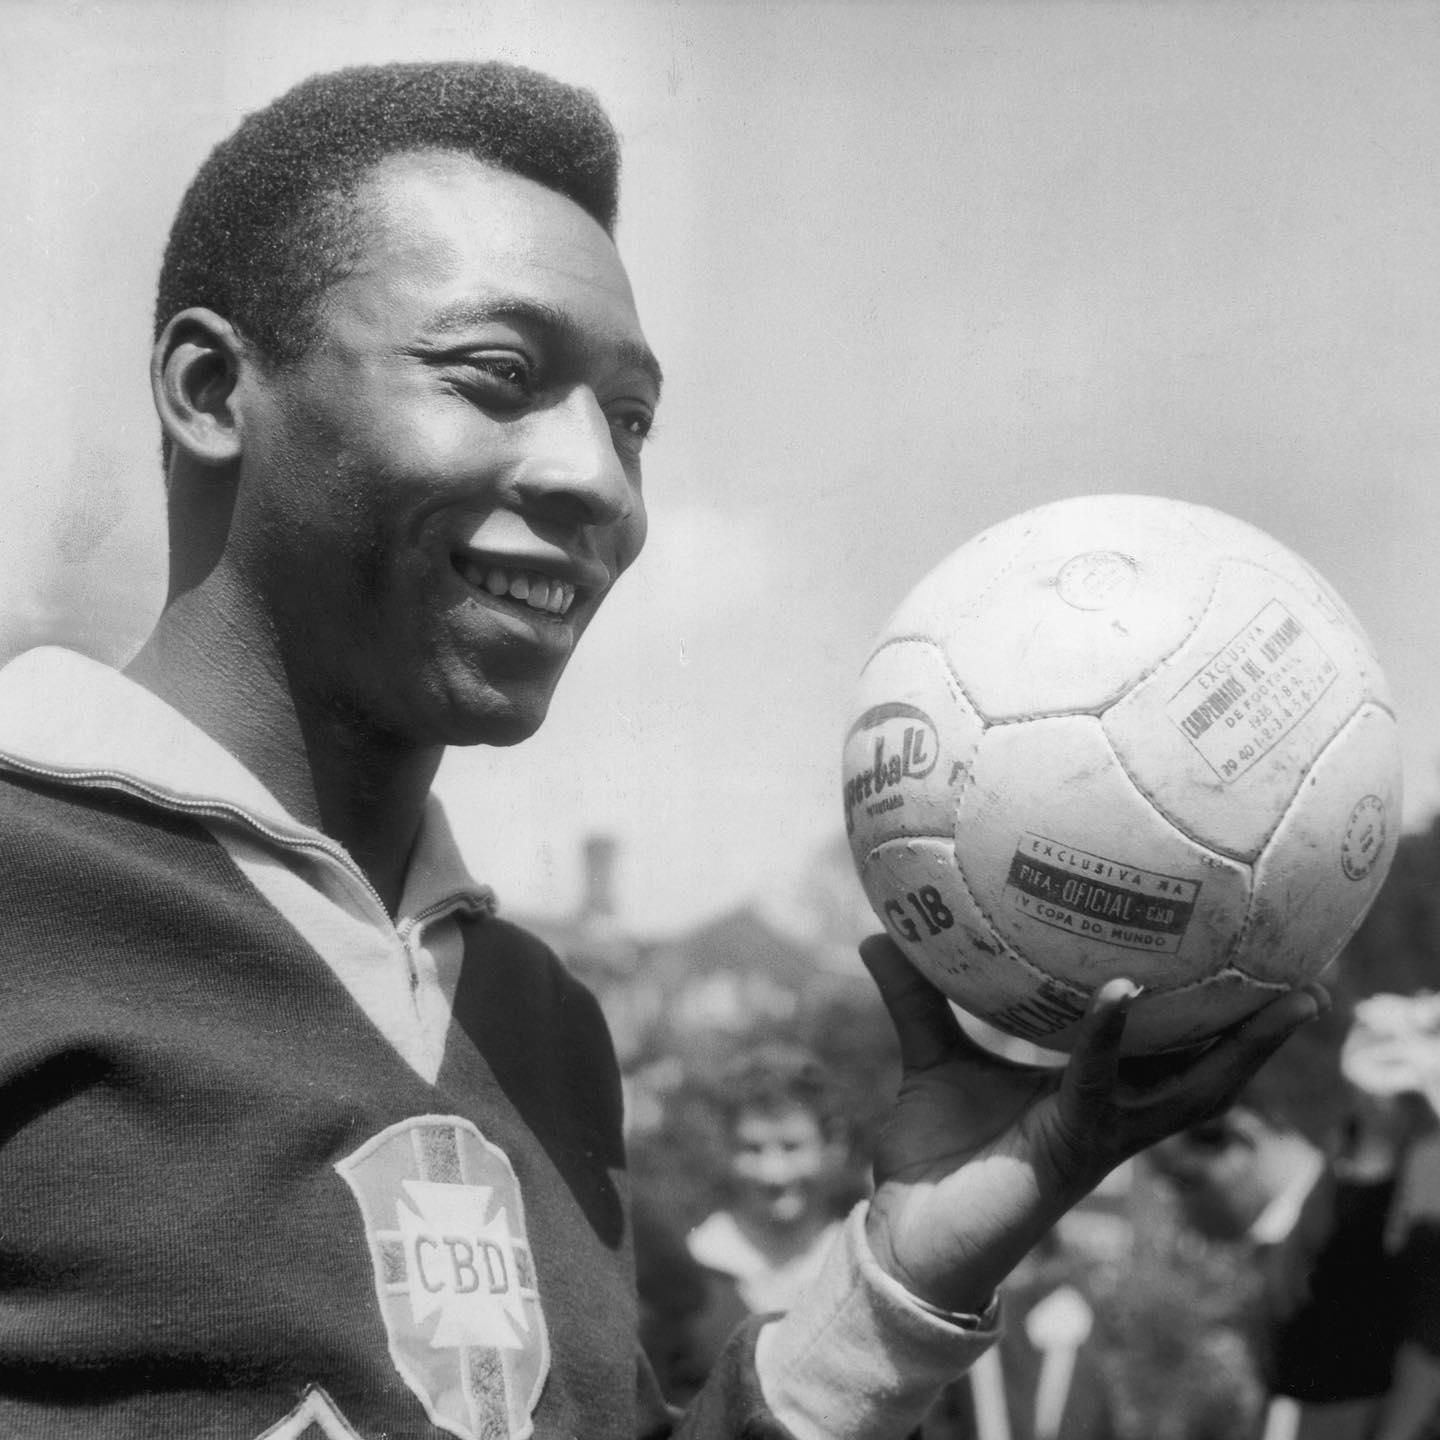 Manchester City - Manchester City are saddened to learn of the passing of Brazil legend Pelé, one of